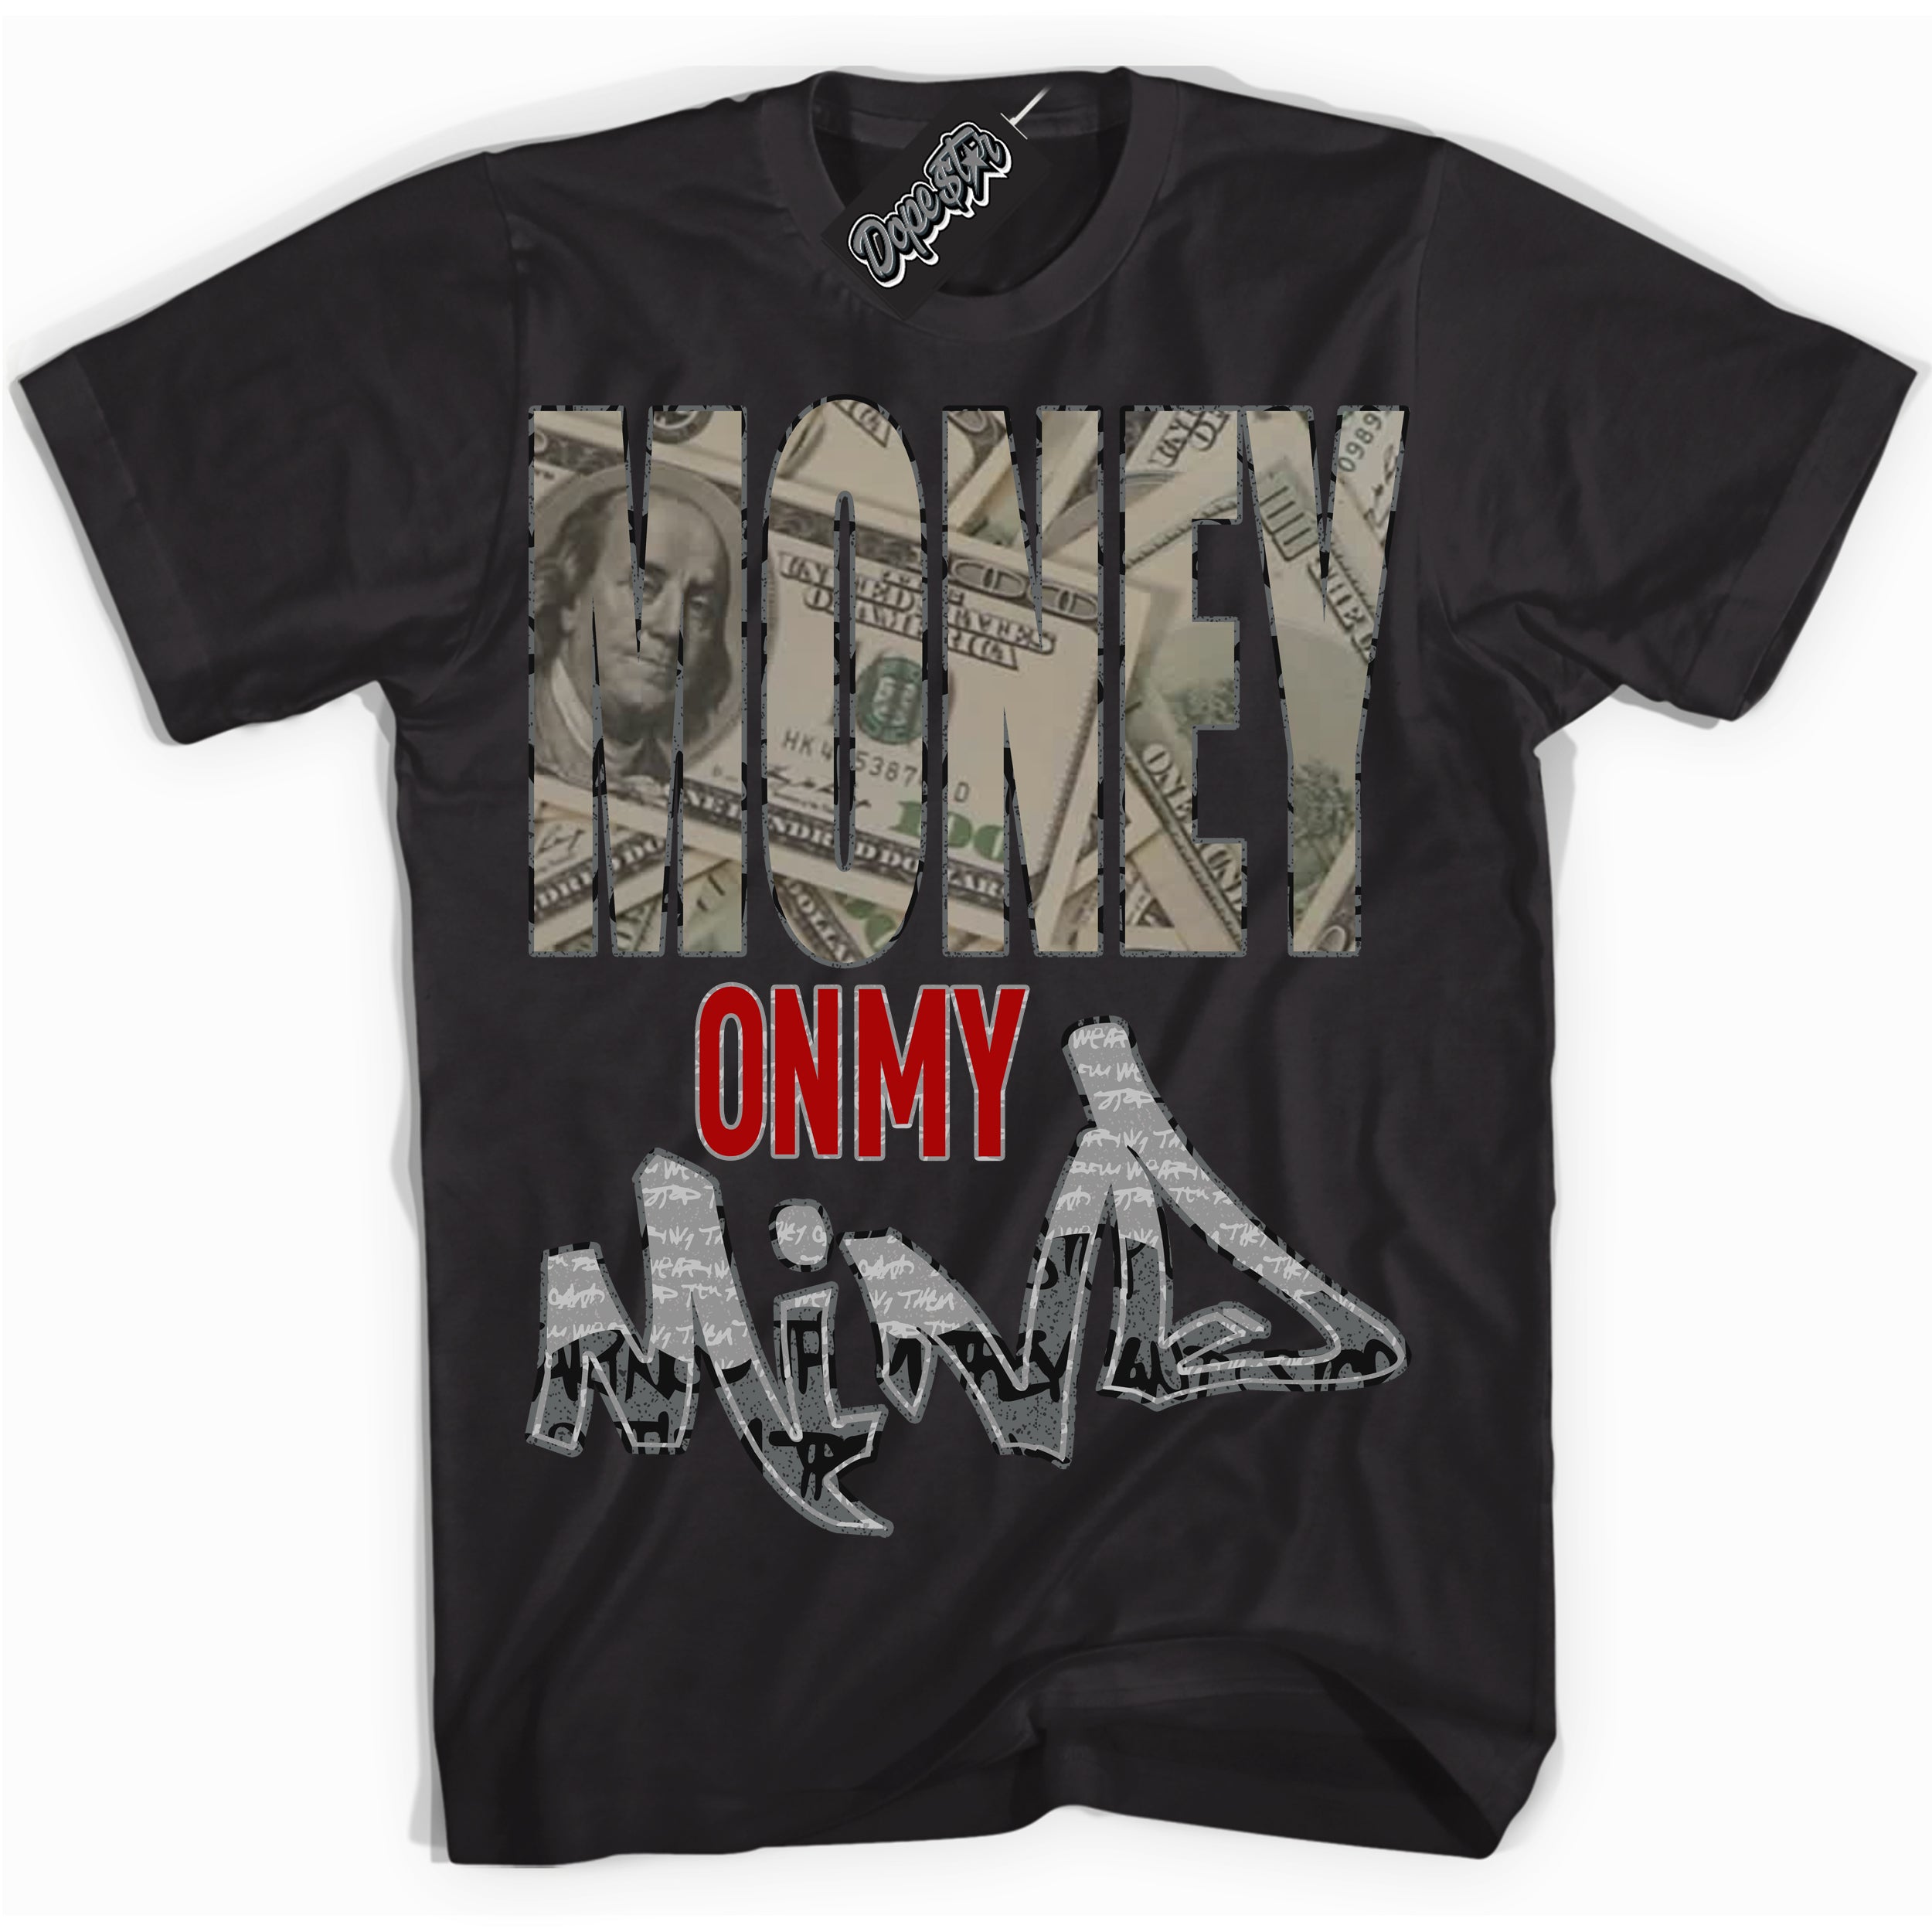 Cool Black Shirt with “ Money On My Mind ” design that perfectly matches Rebellionaire 1s Sneakers.